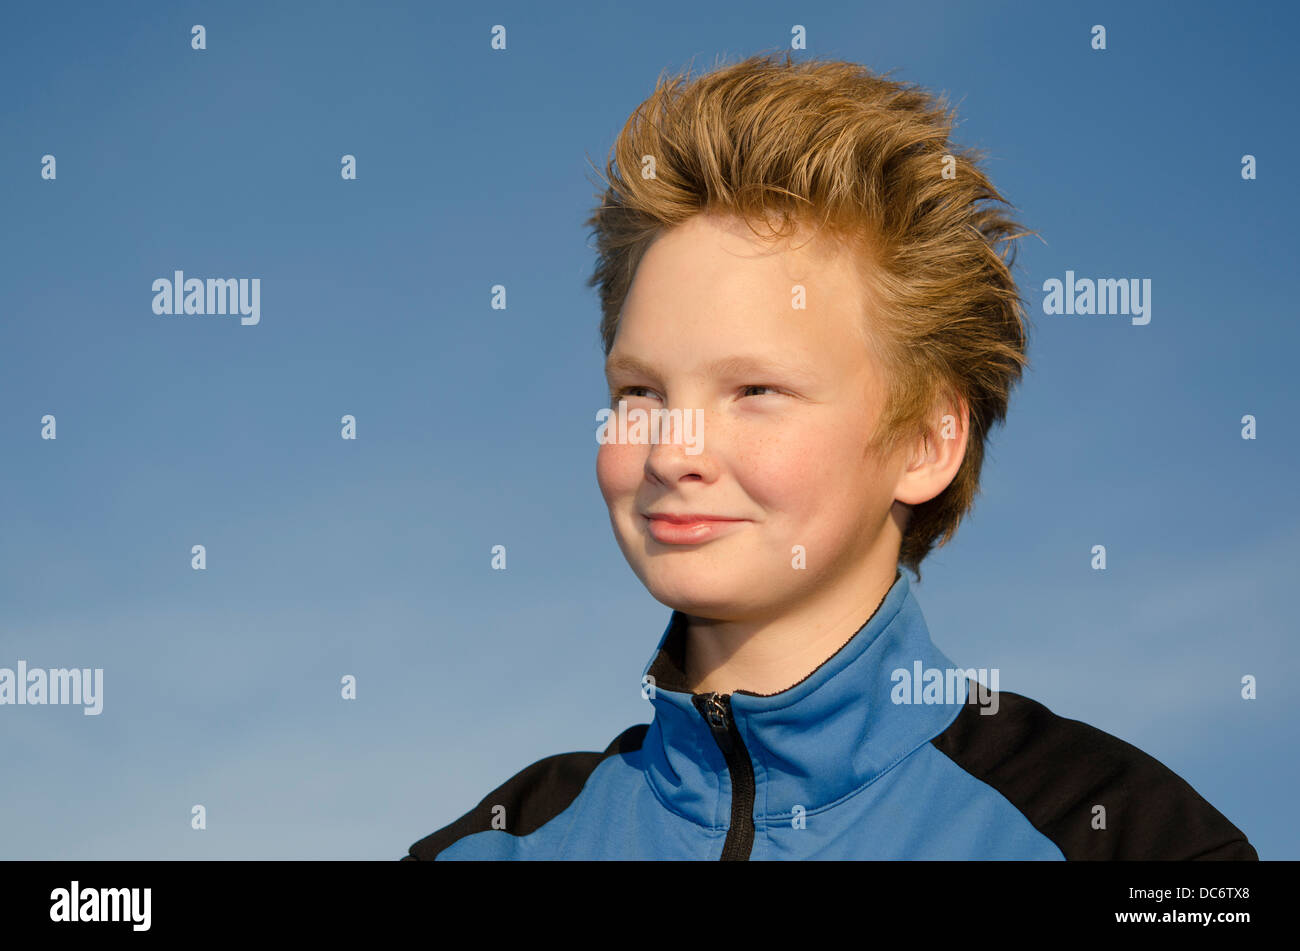 Portrait of guy with spiky hairstyle against blue sky Stock Photo